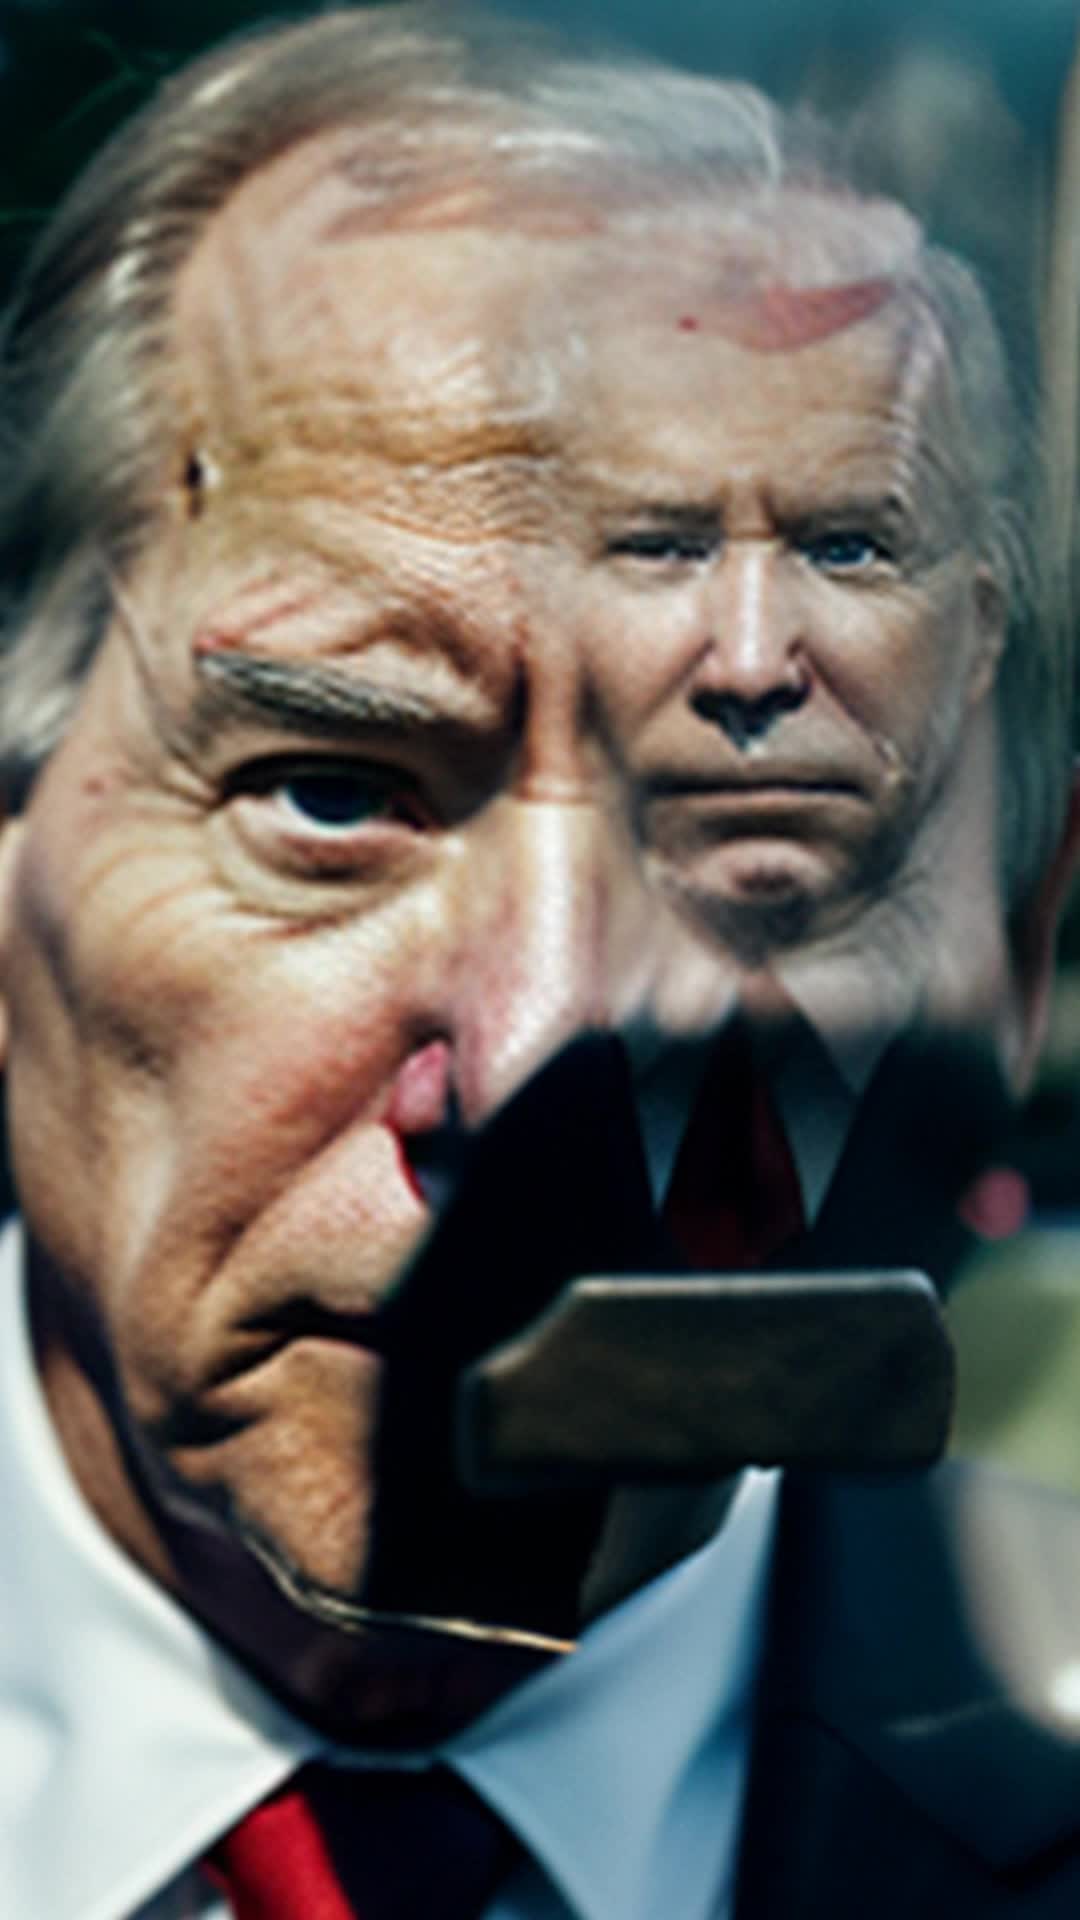 Marionette of President Joe Biden, manipulated by strings, detailed face, realistic movements, formal suit, on the White House lawn setting, soft shadows, wideangle shot, dramatic lighting, high fidelity, crisp resolution, subtle background music adding eerie atmosphere, slow and deliberate movements for added tension, closeup view of facial expressions, silky smooth animation, high frame rate for lifelike motion